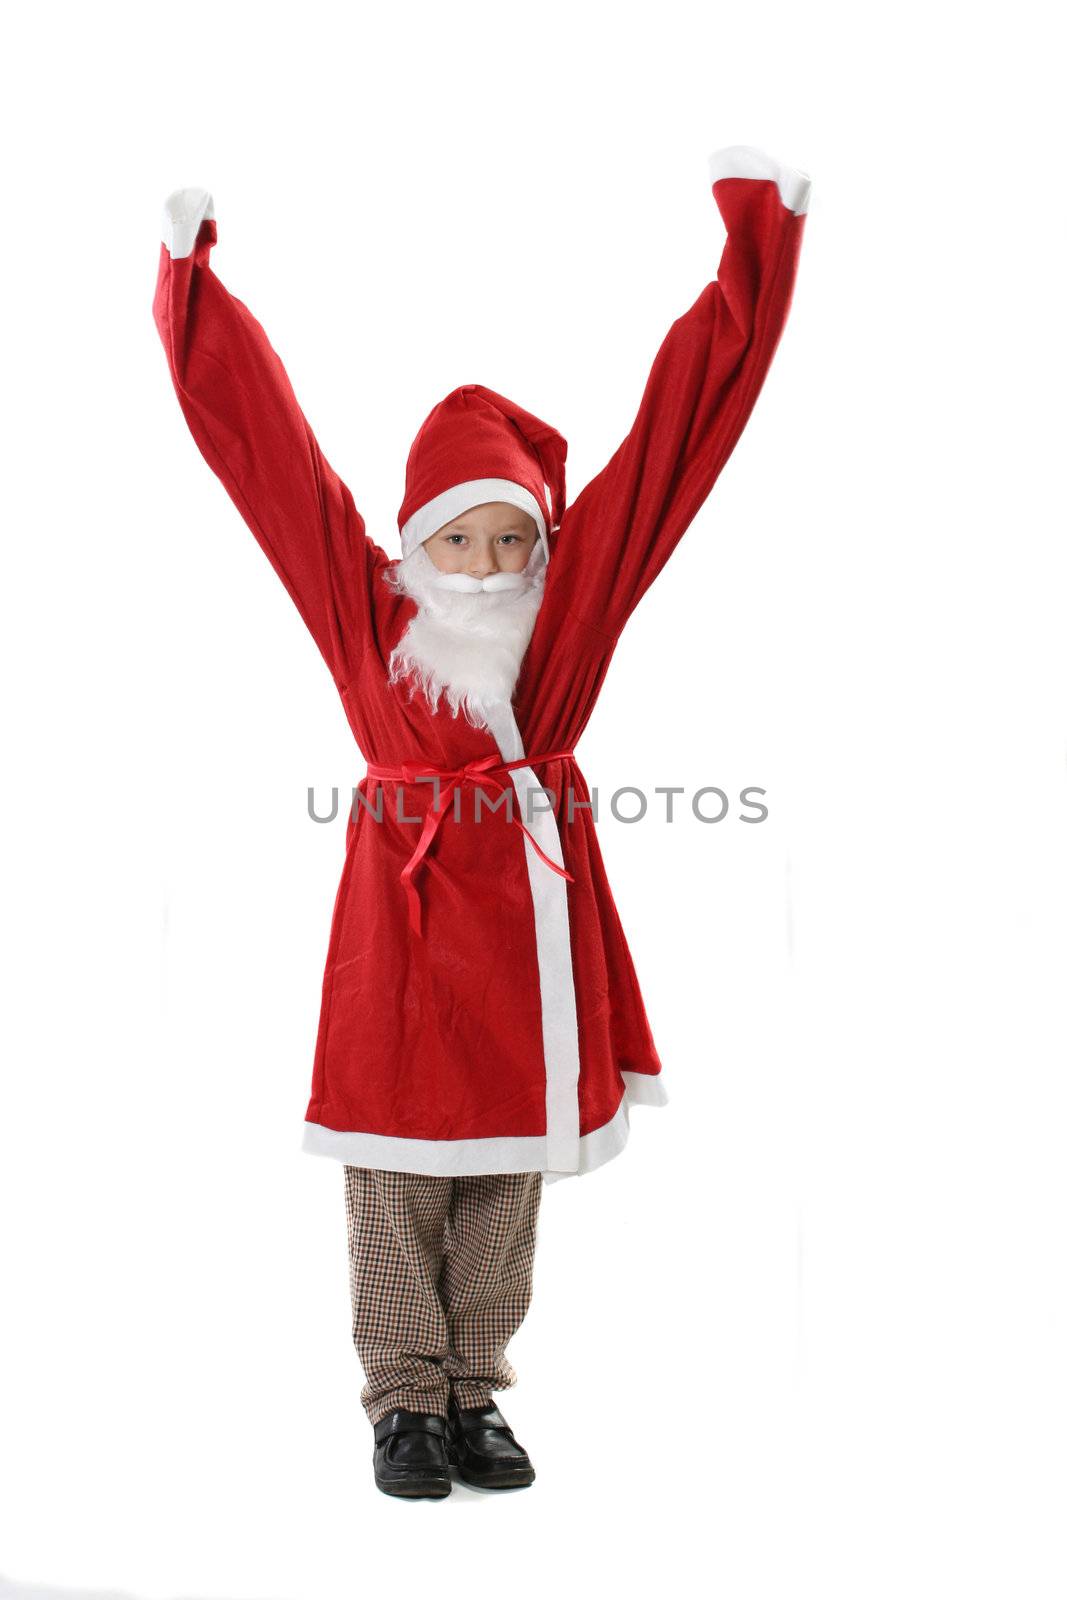 The child in a suit of the Santa-Claus with the hands lifted upwards